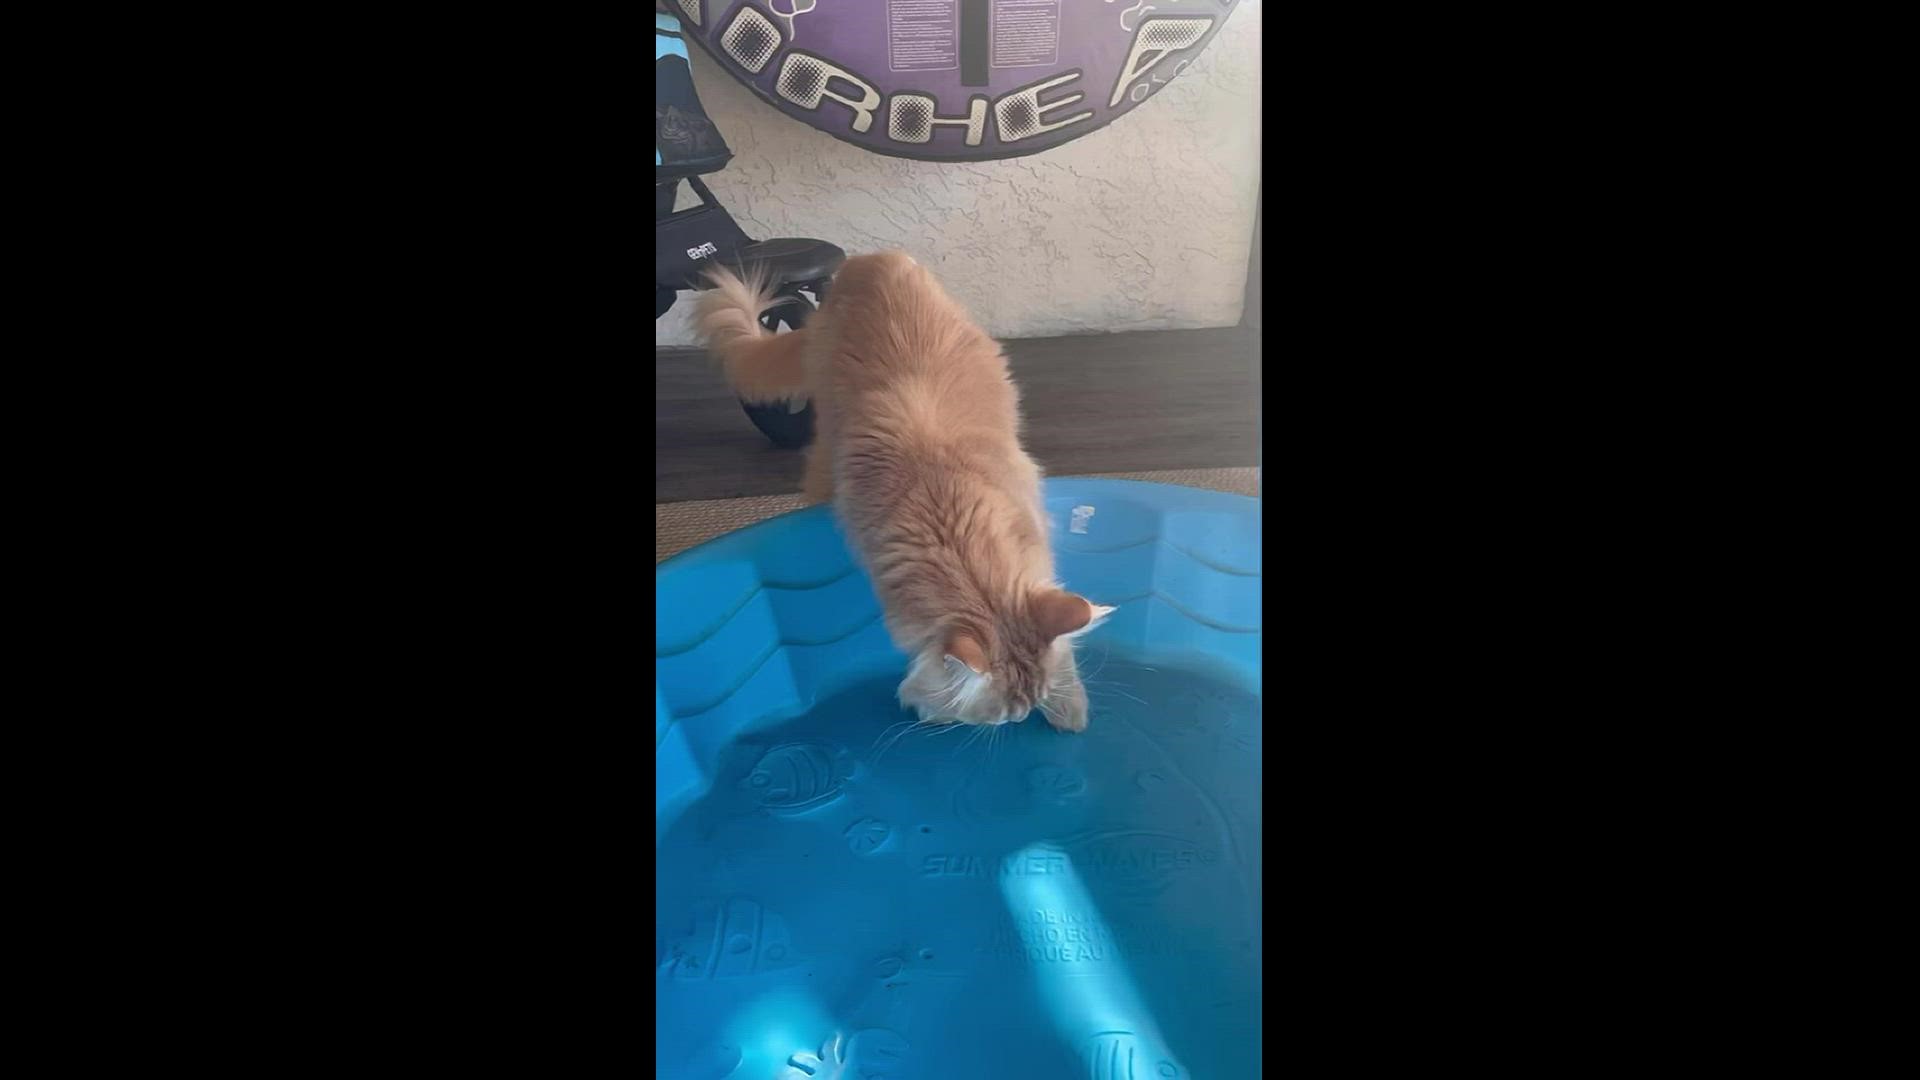 Who says cats can't swim? Meet two kitties living the best of their nine lives